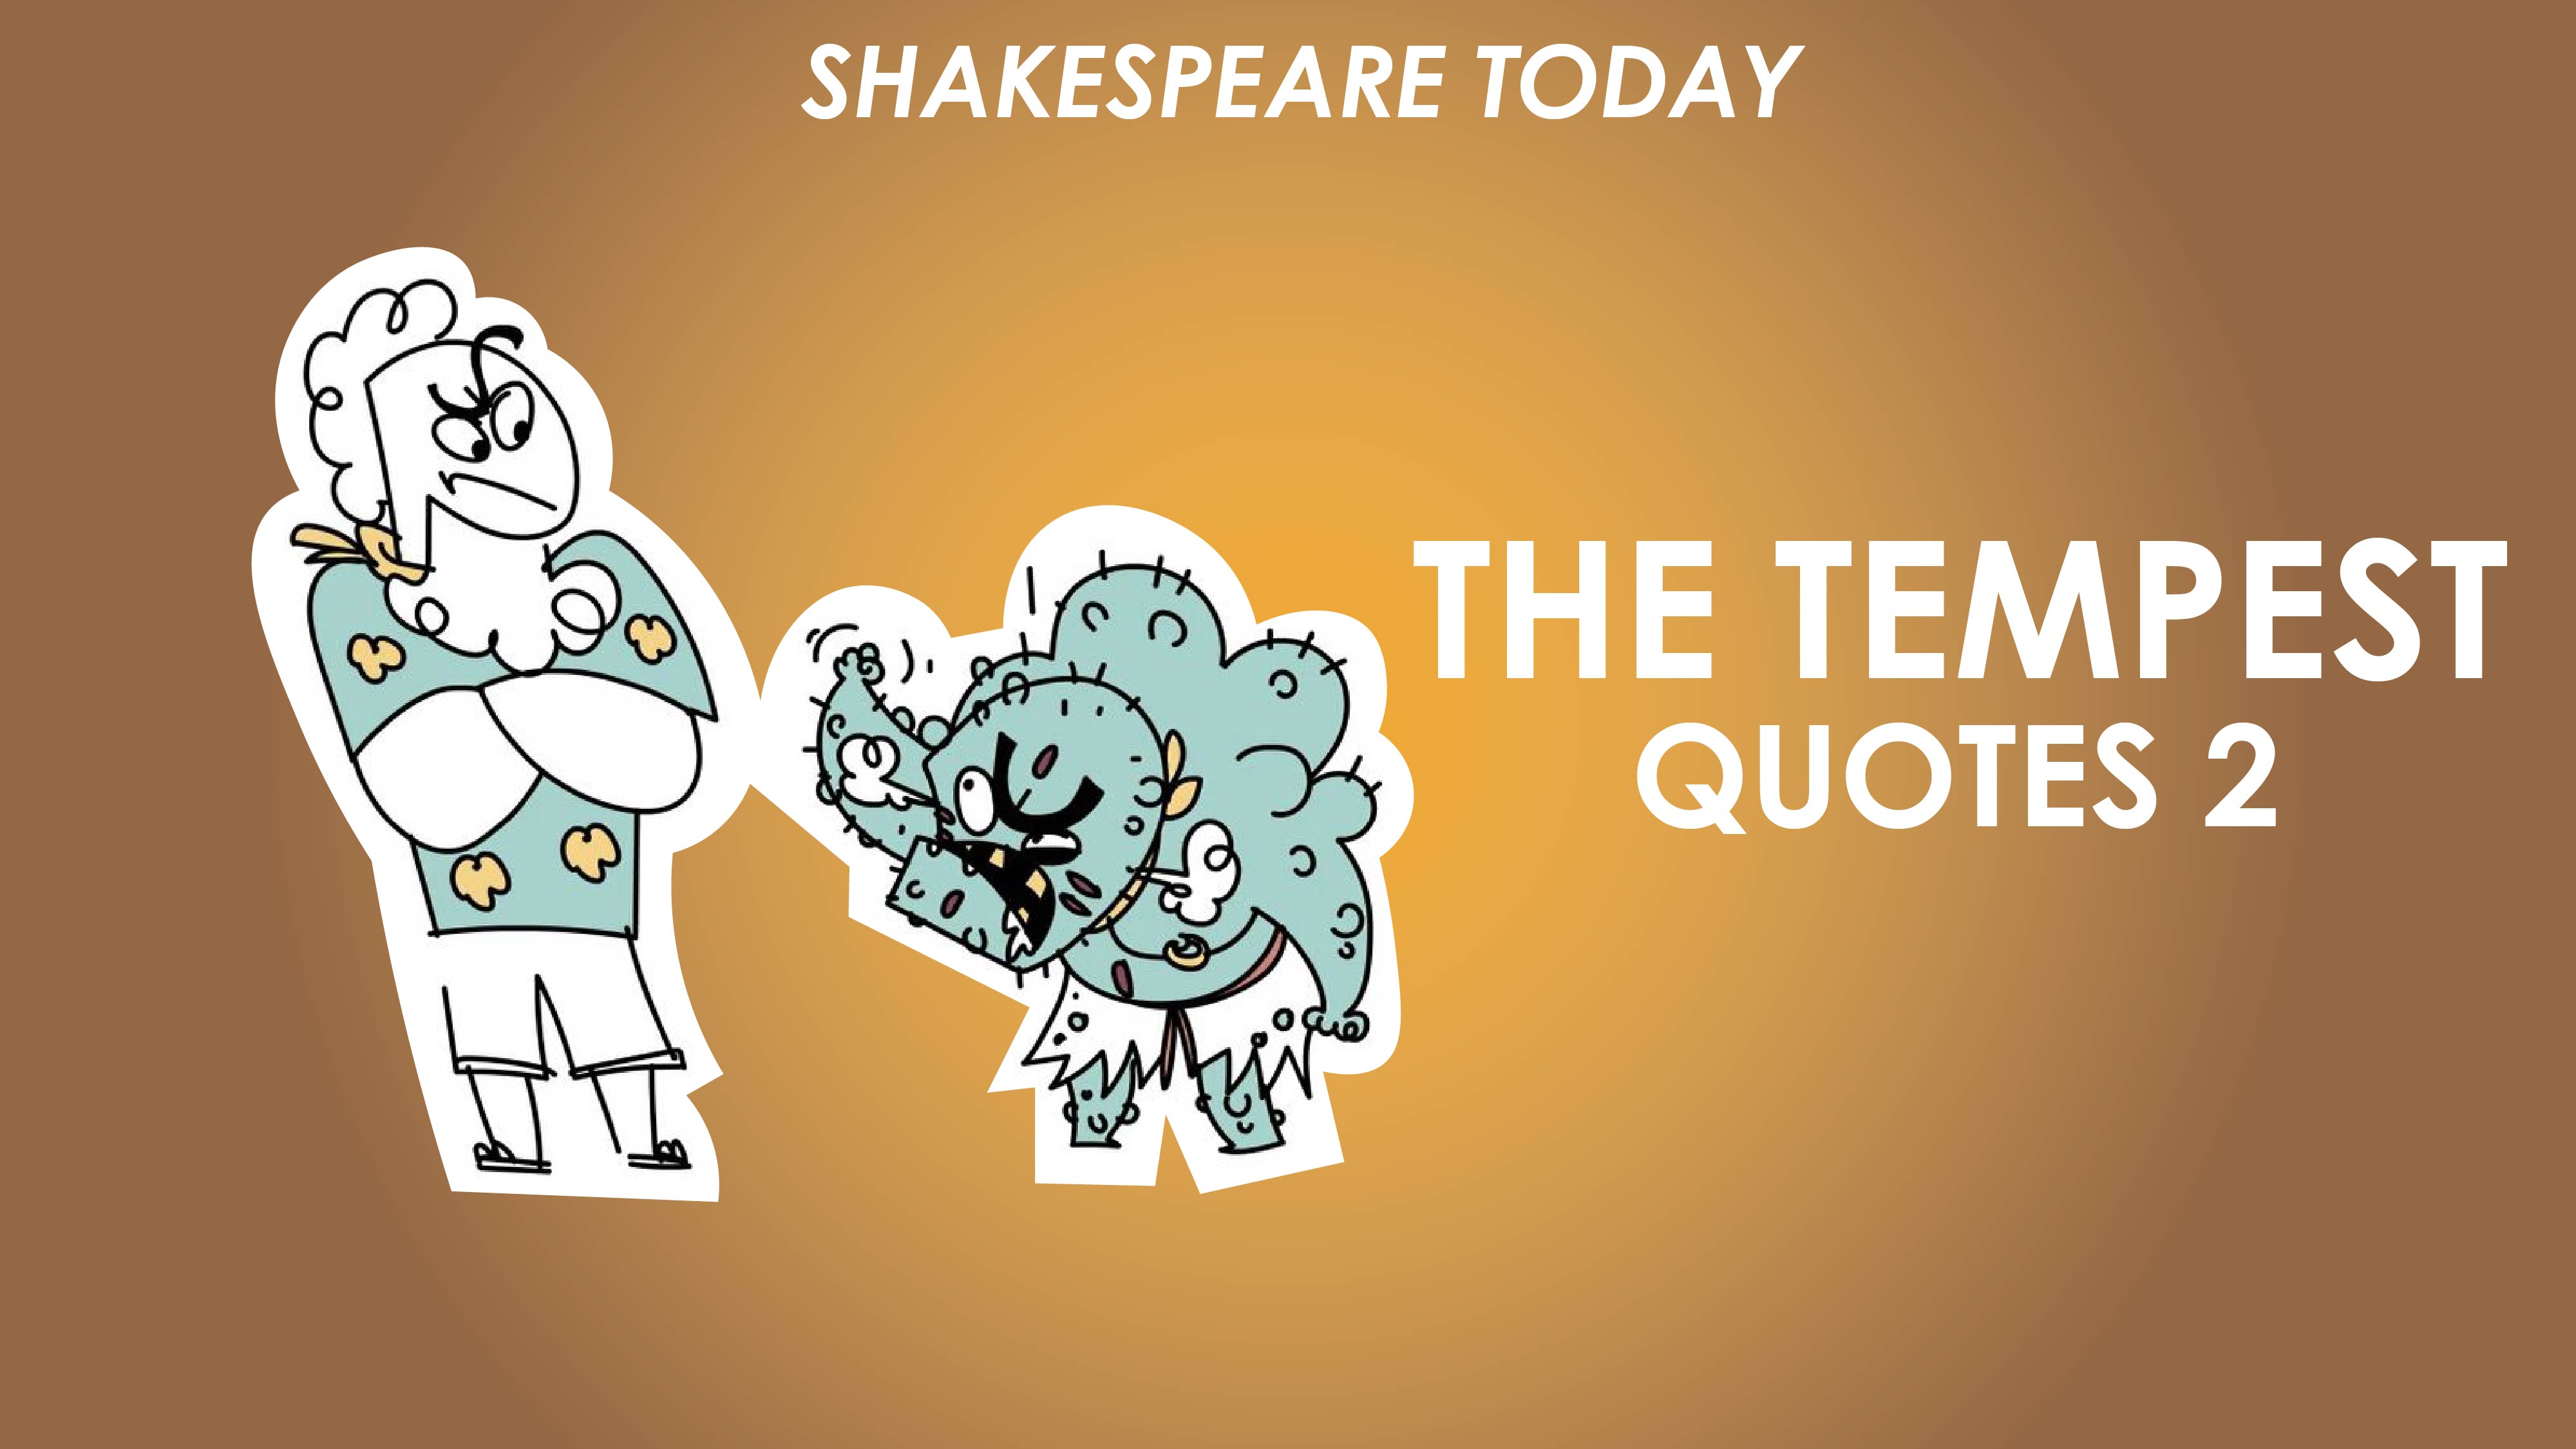 The Tempest Key Quotes Analysis Part 2 - Shakespeare Today Series